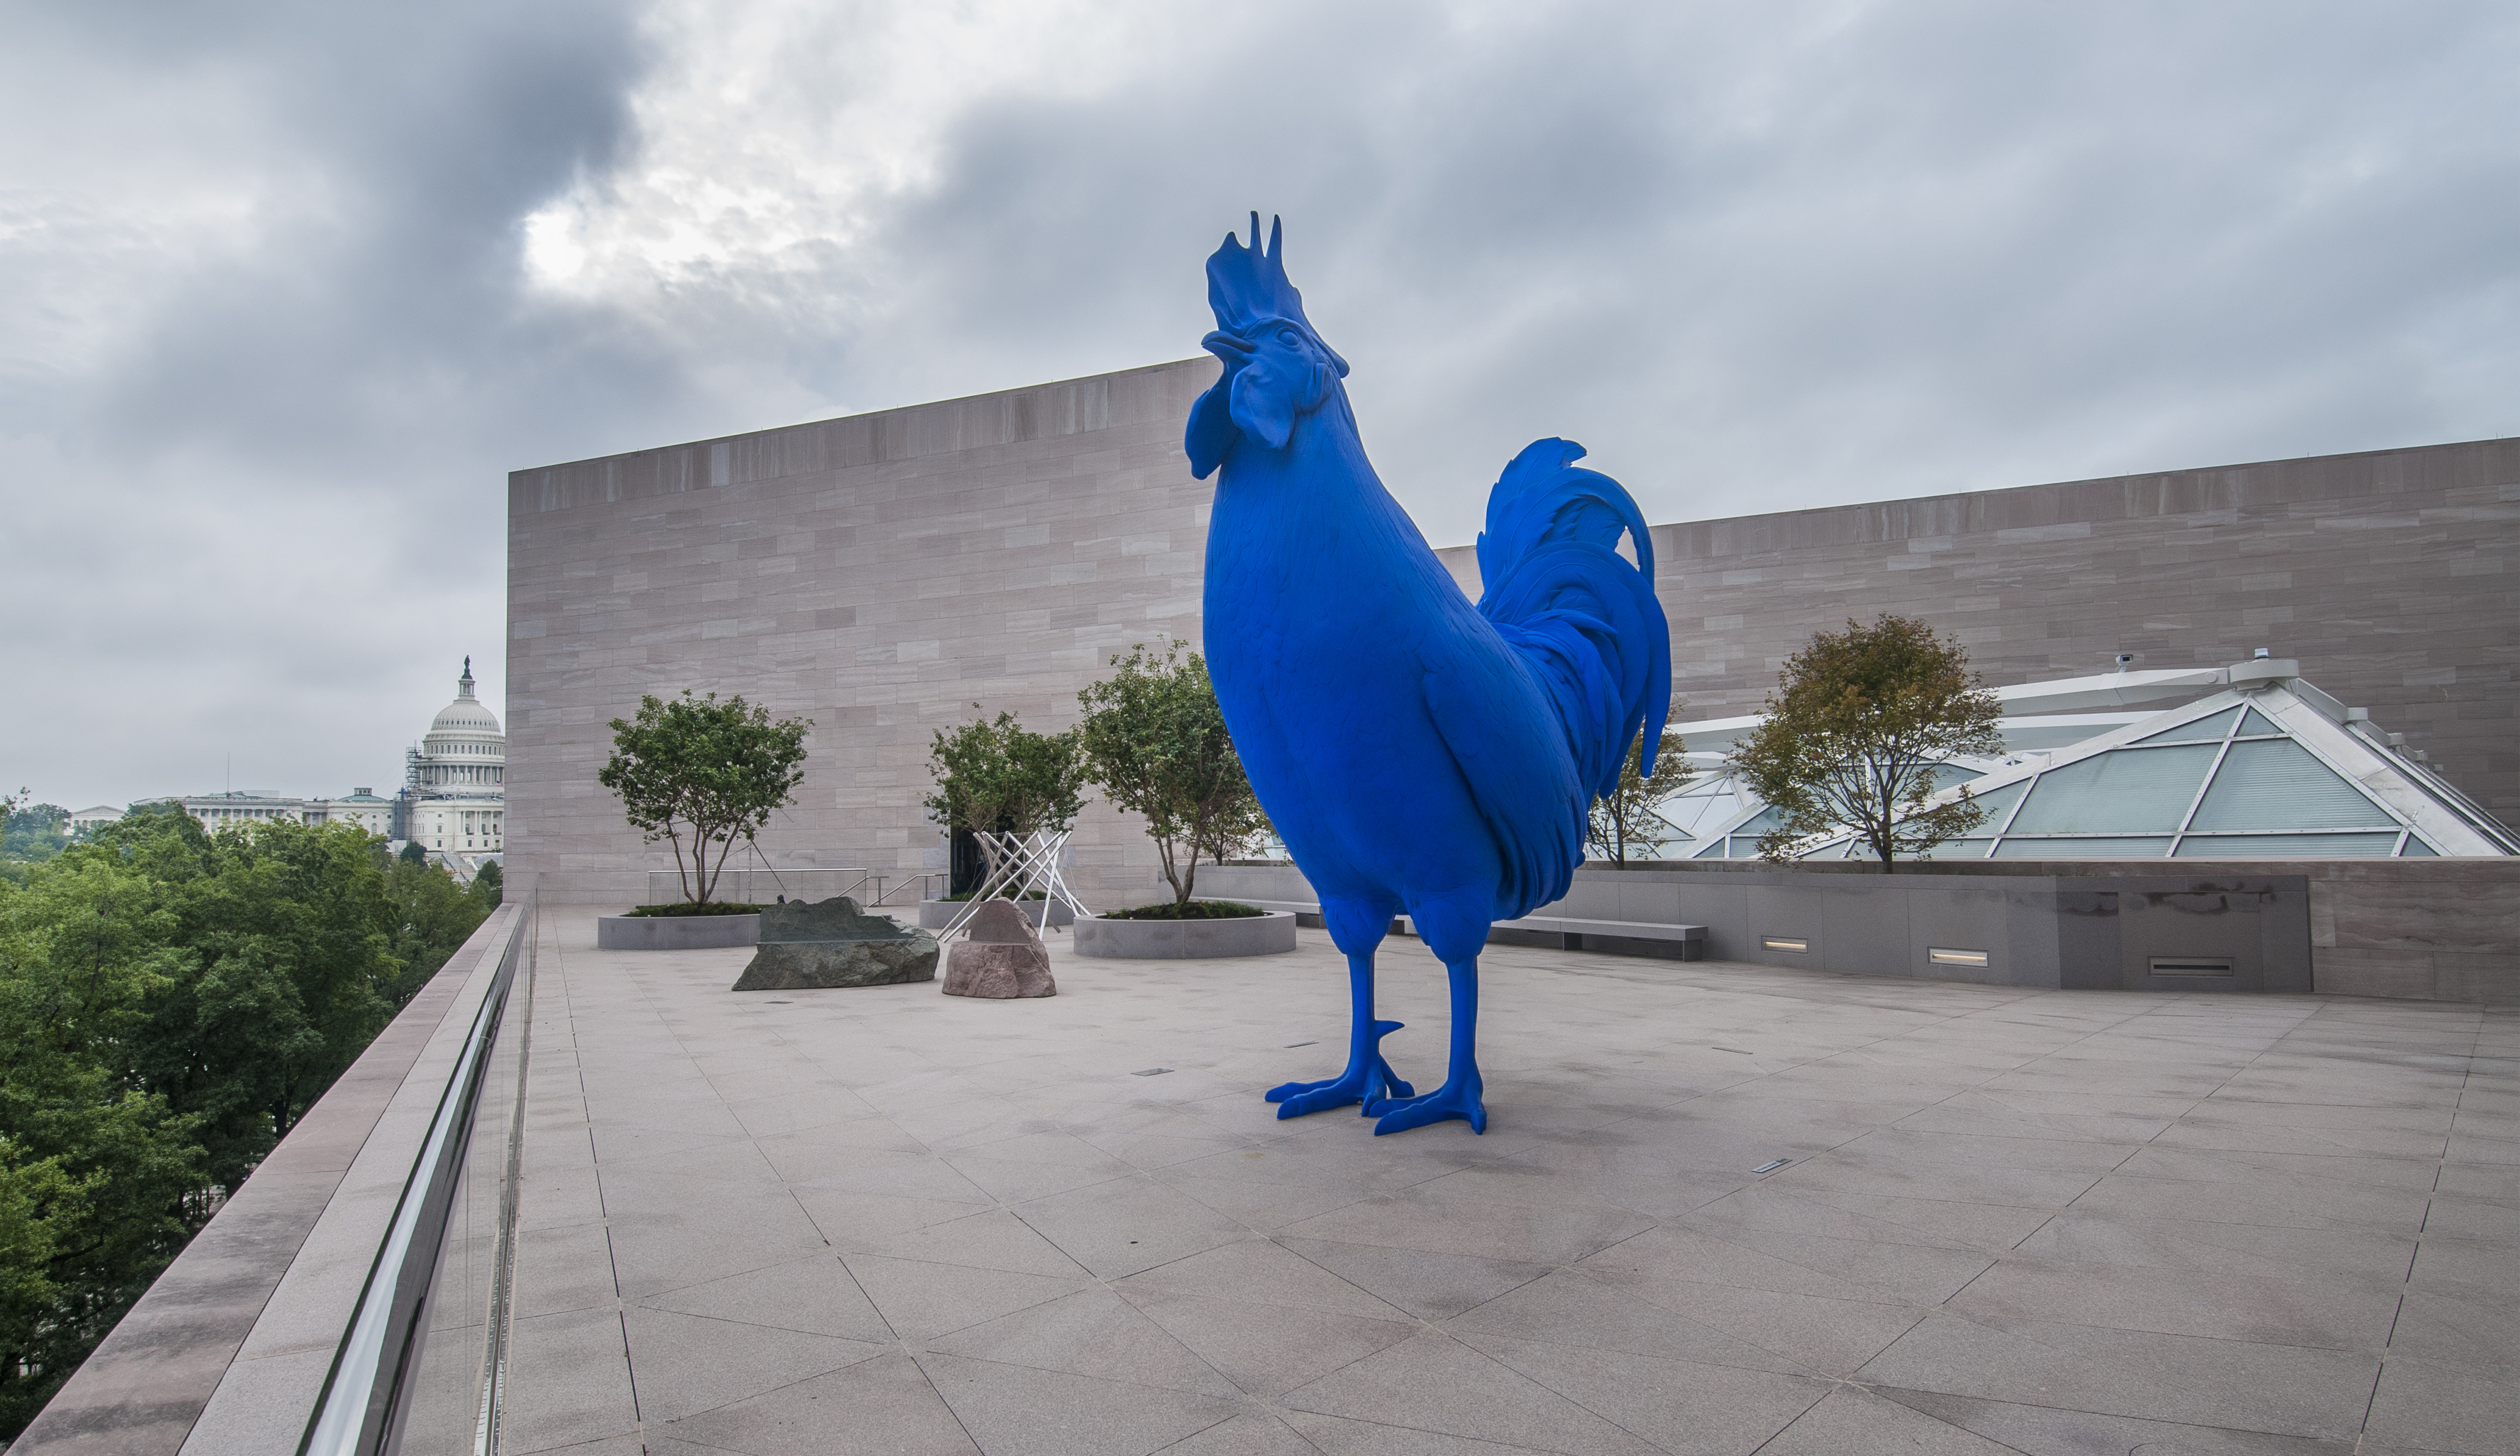 "Hahn/Cock" (2013) by Katharina Fritsch on the National Gallery of Art’s East Building Roof Terrace
glass fiber reinforced polyester resin fixed on stainless steel supporting structure
overall: 440.06 × 440.06 × 149.86 cm (173 1/4 × 173 1/4 × 59 in.)
gross weight: 740.044 kg (1631.5 lb.)
National Gallery of Art, Washington
Gift of Glenstone Foundation 
